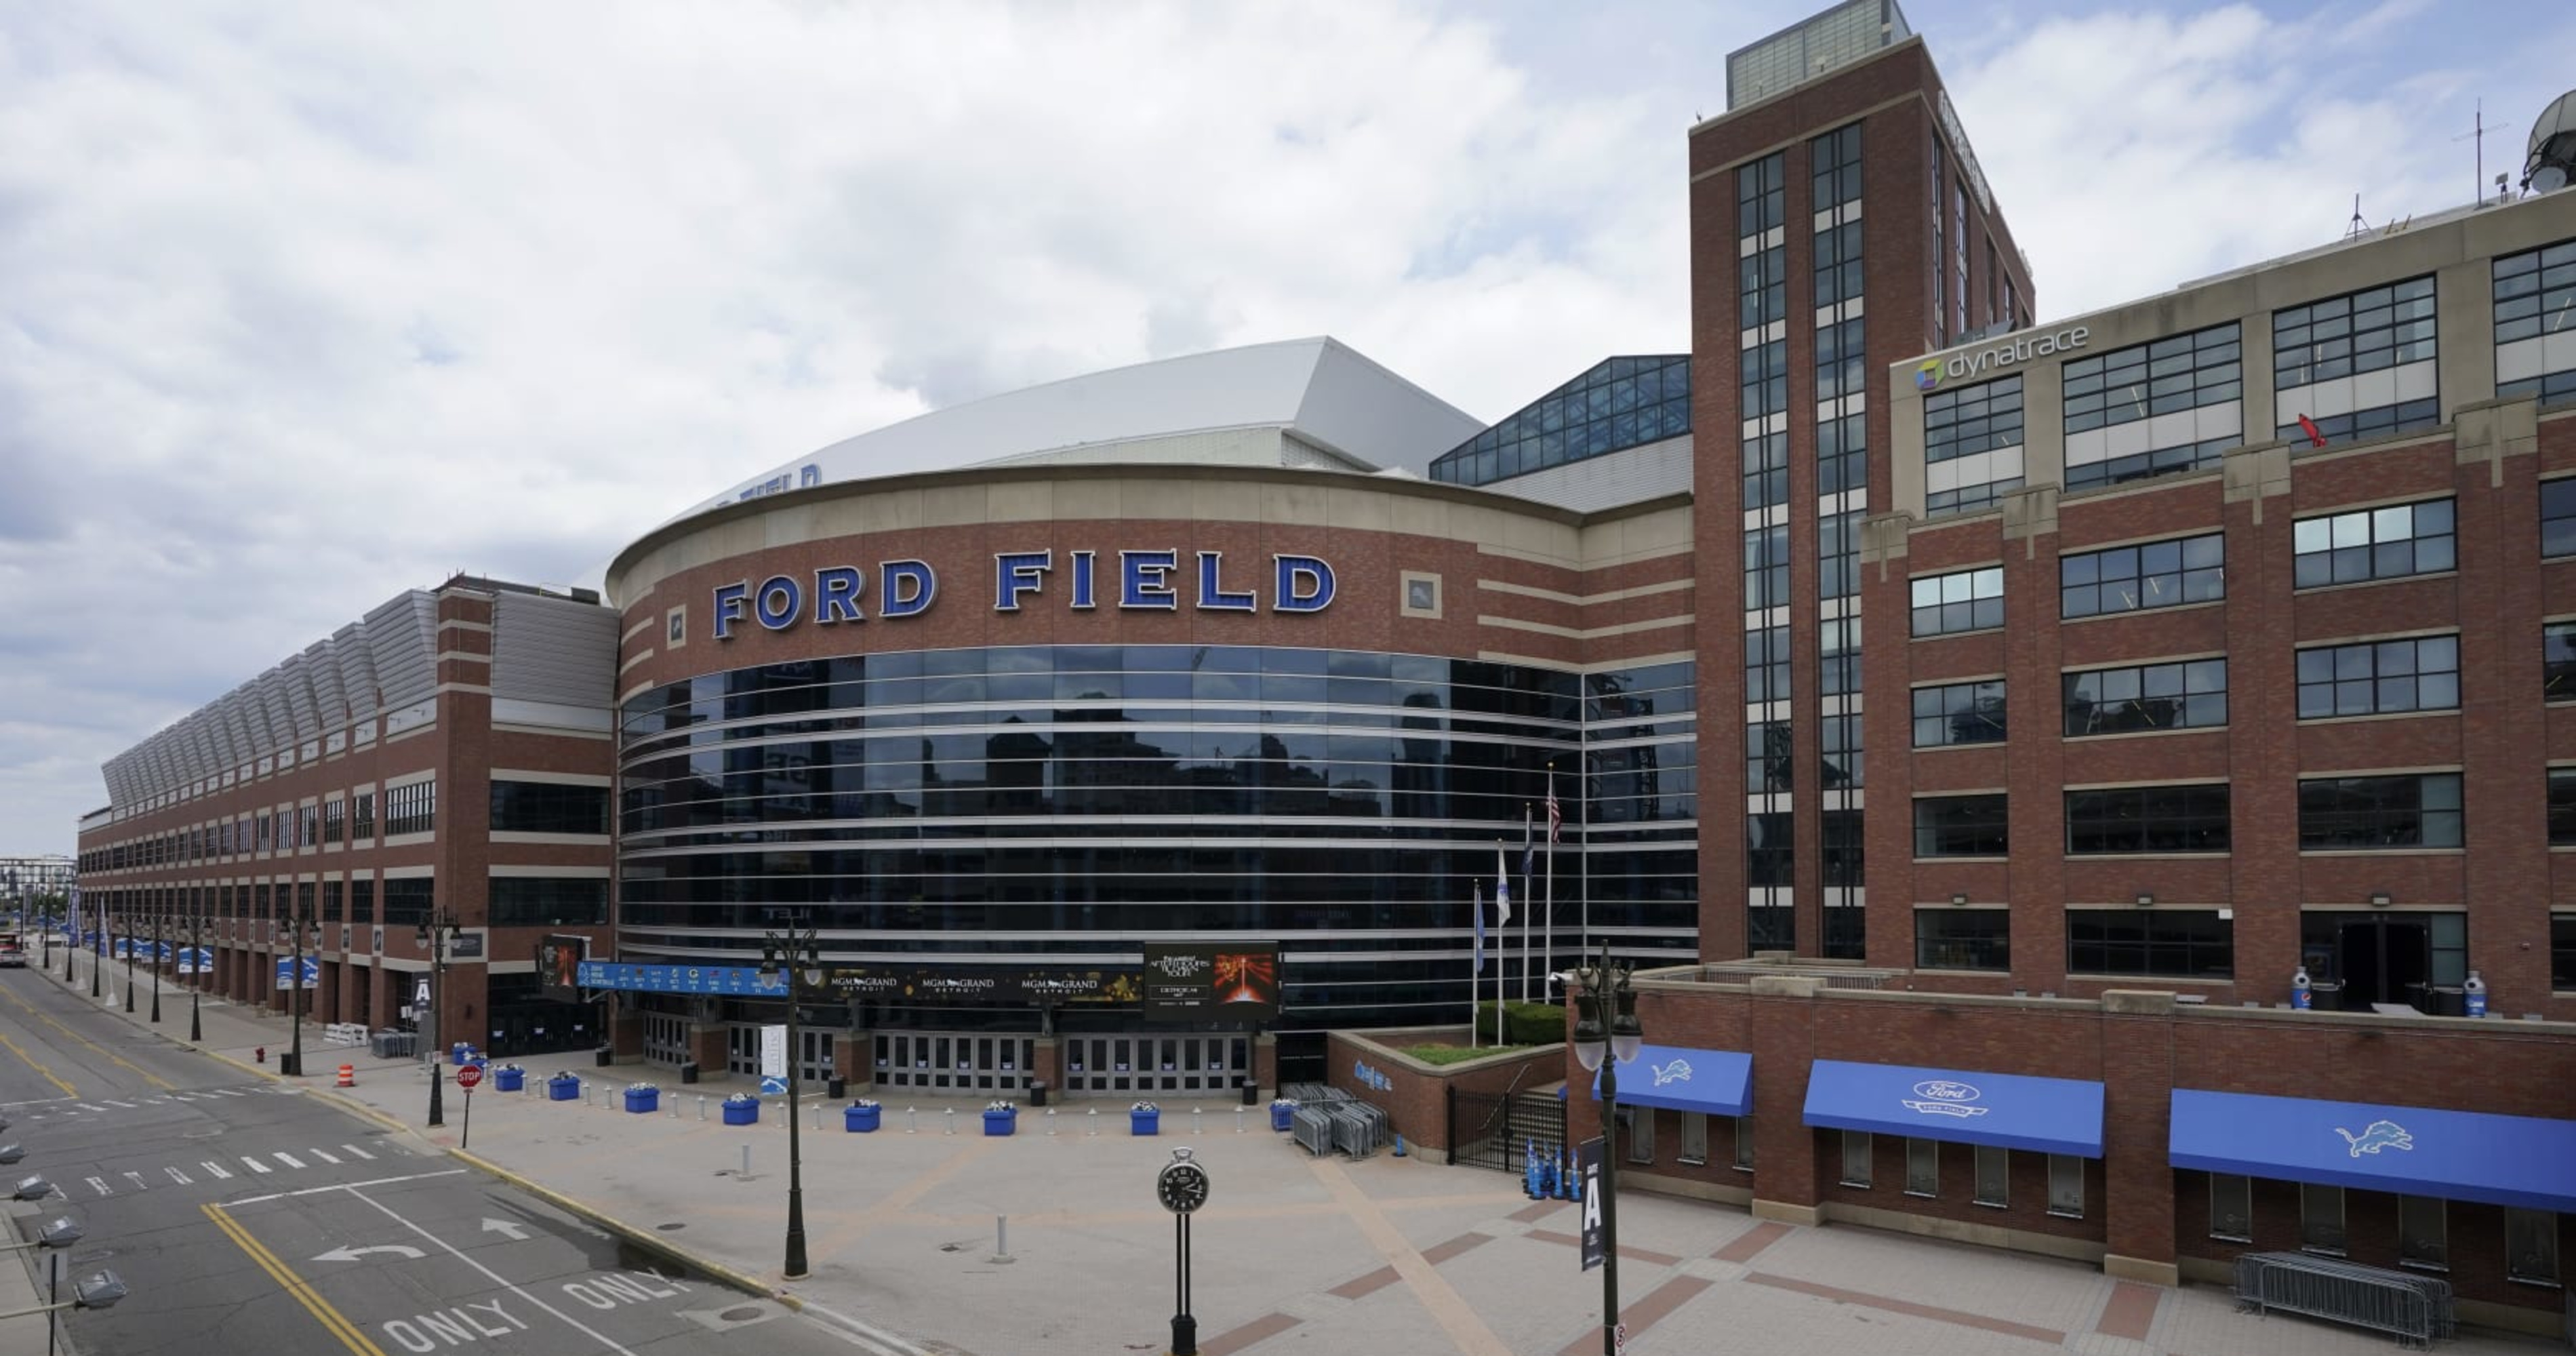 The Palace of Auburn Hills Complete Parking Guide - Stadium Parking Guides